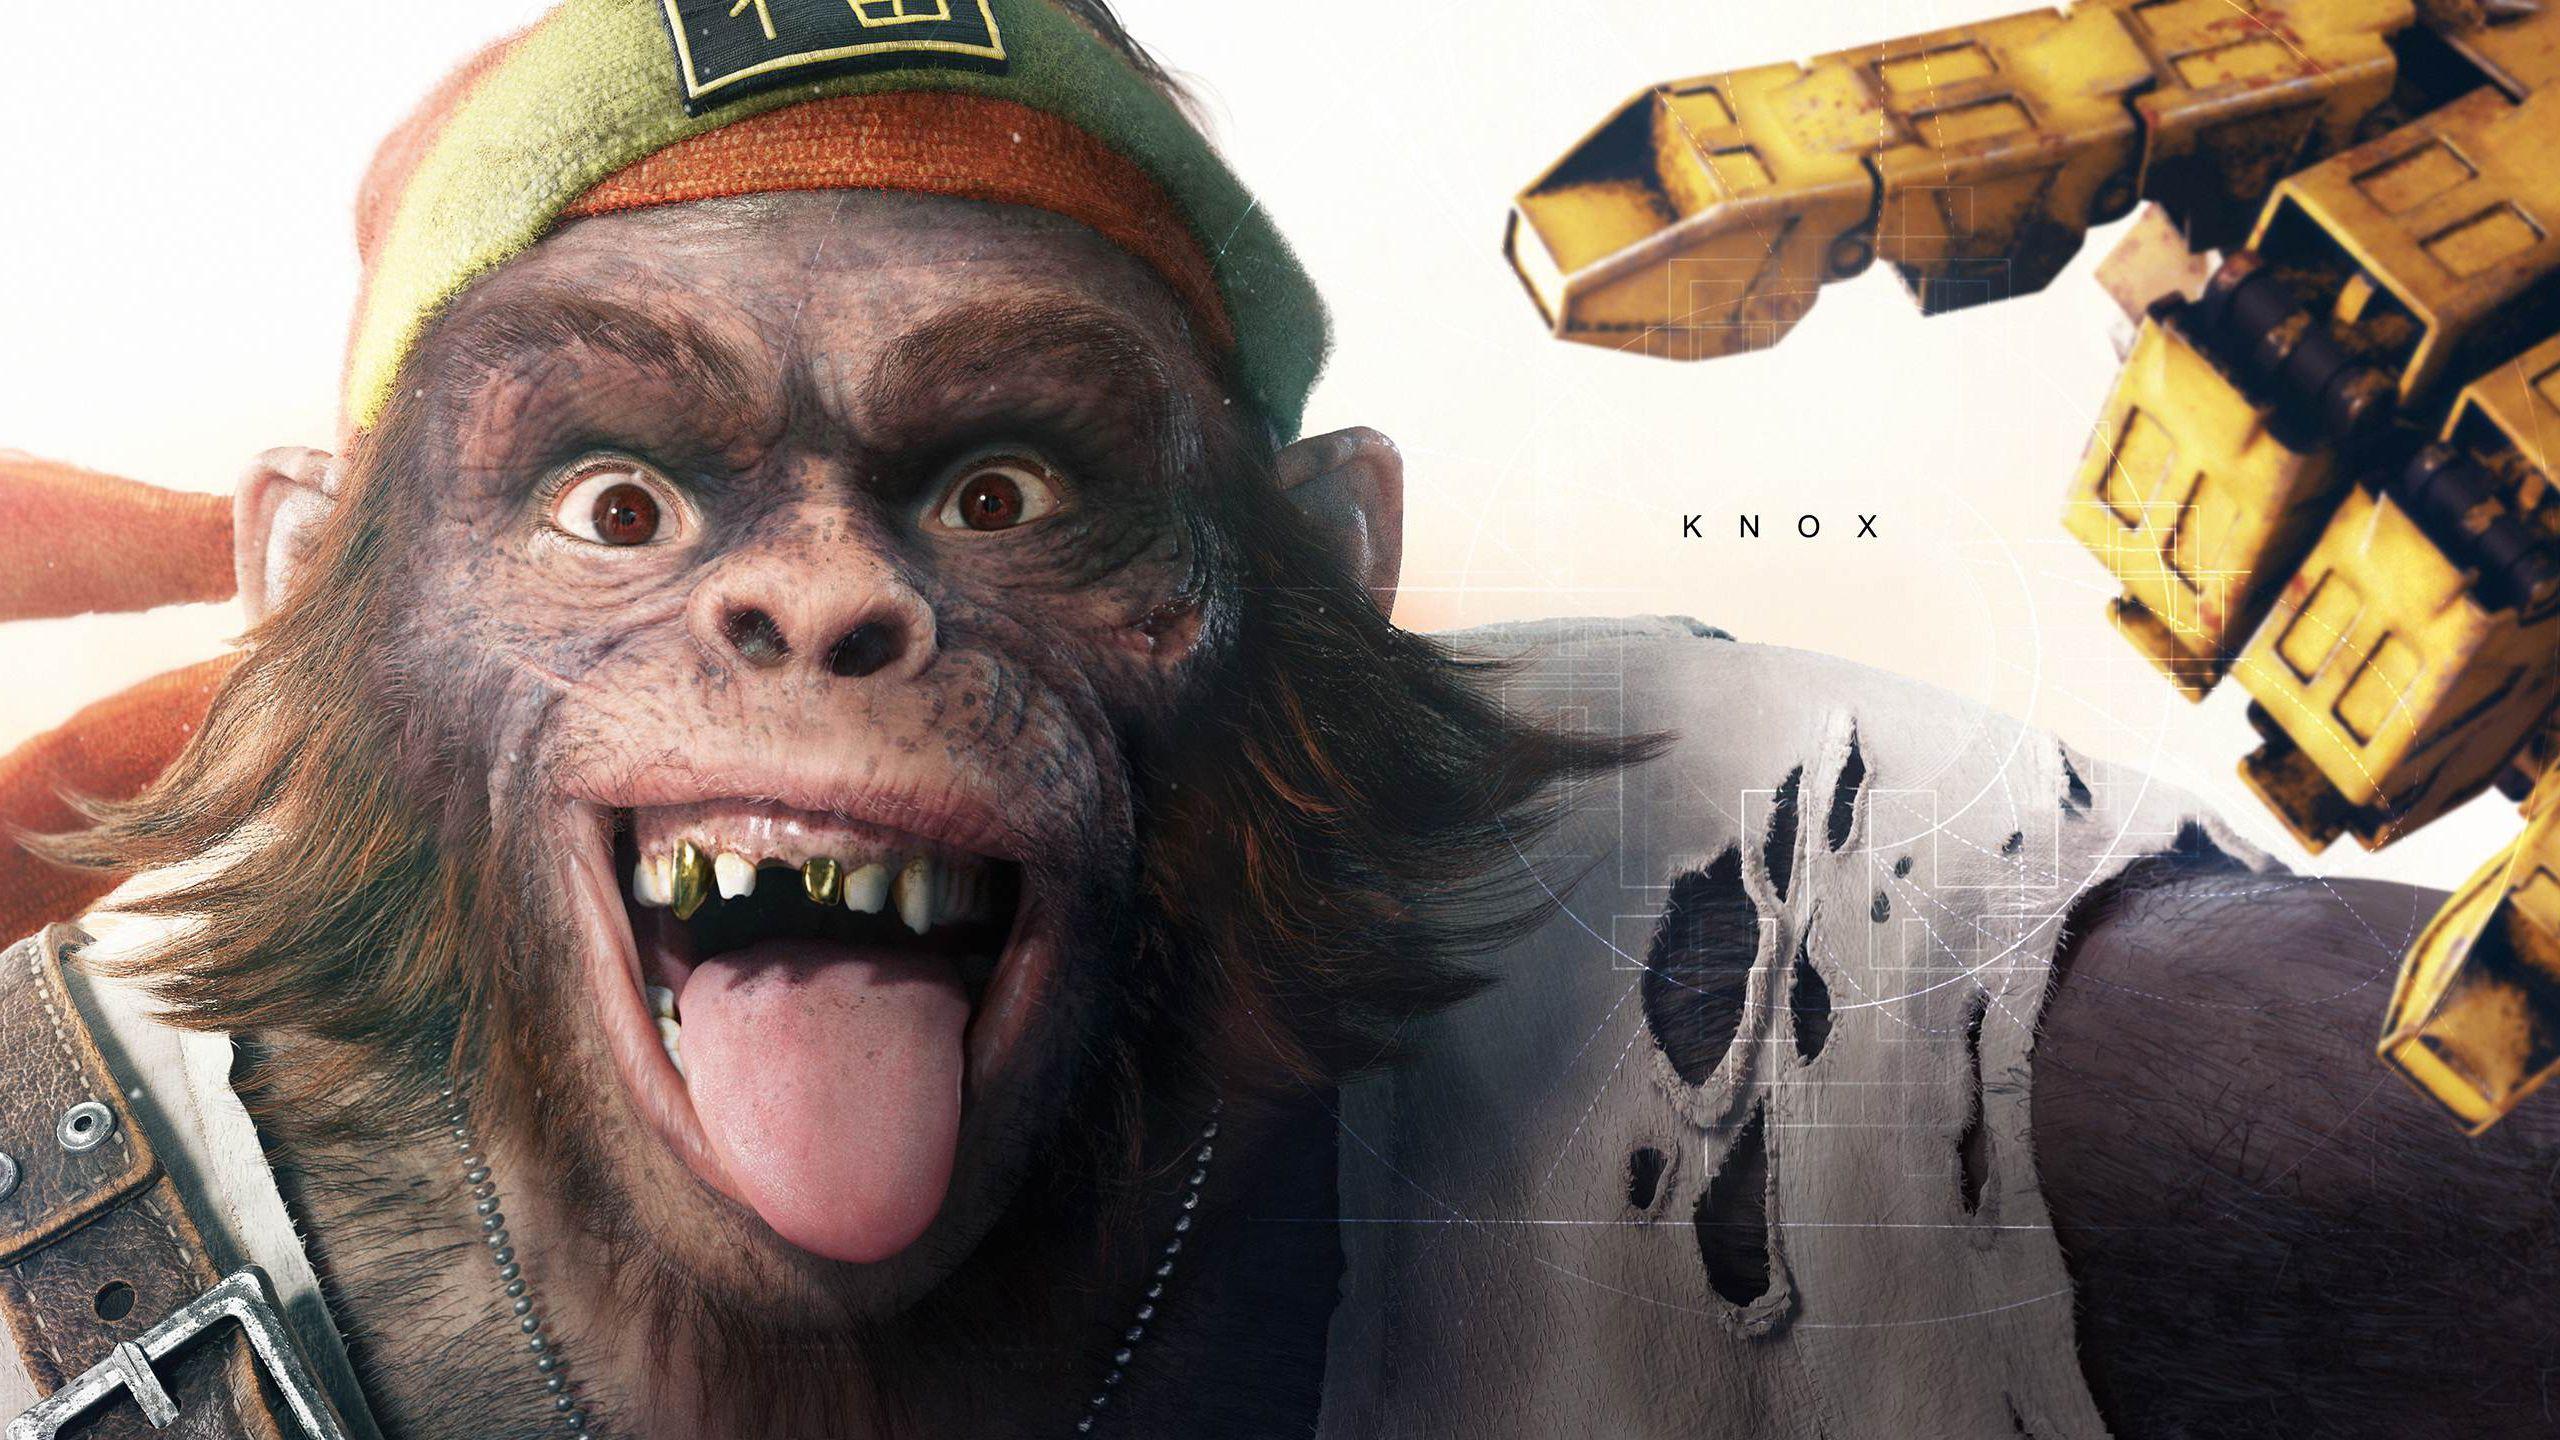 beyond good and evil 2 space monkey